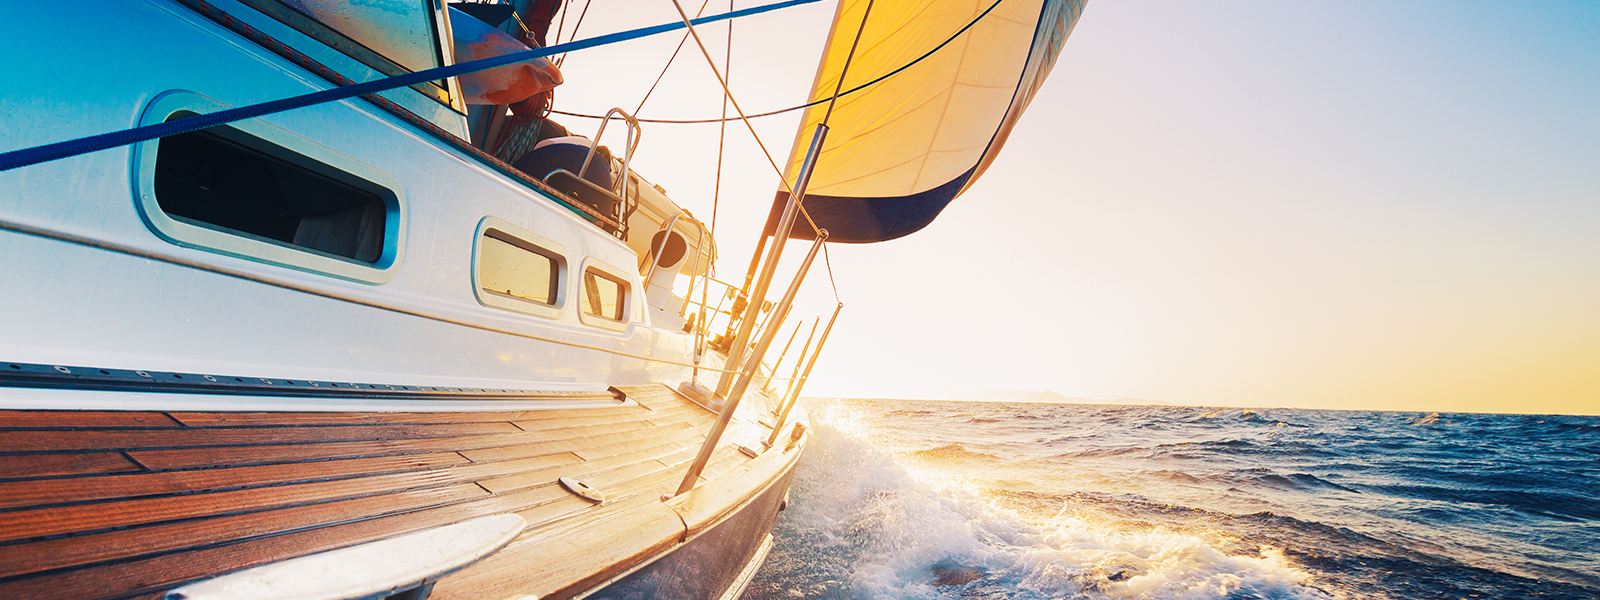 Wk21 // Smooth Sailing Ahead: Secure Your Summer Adventures with Boat Insurance ⛵️🌊